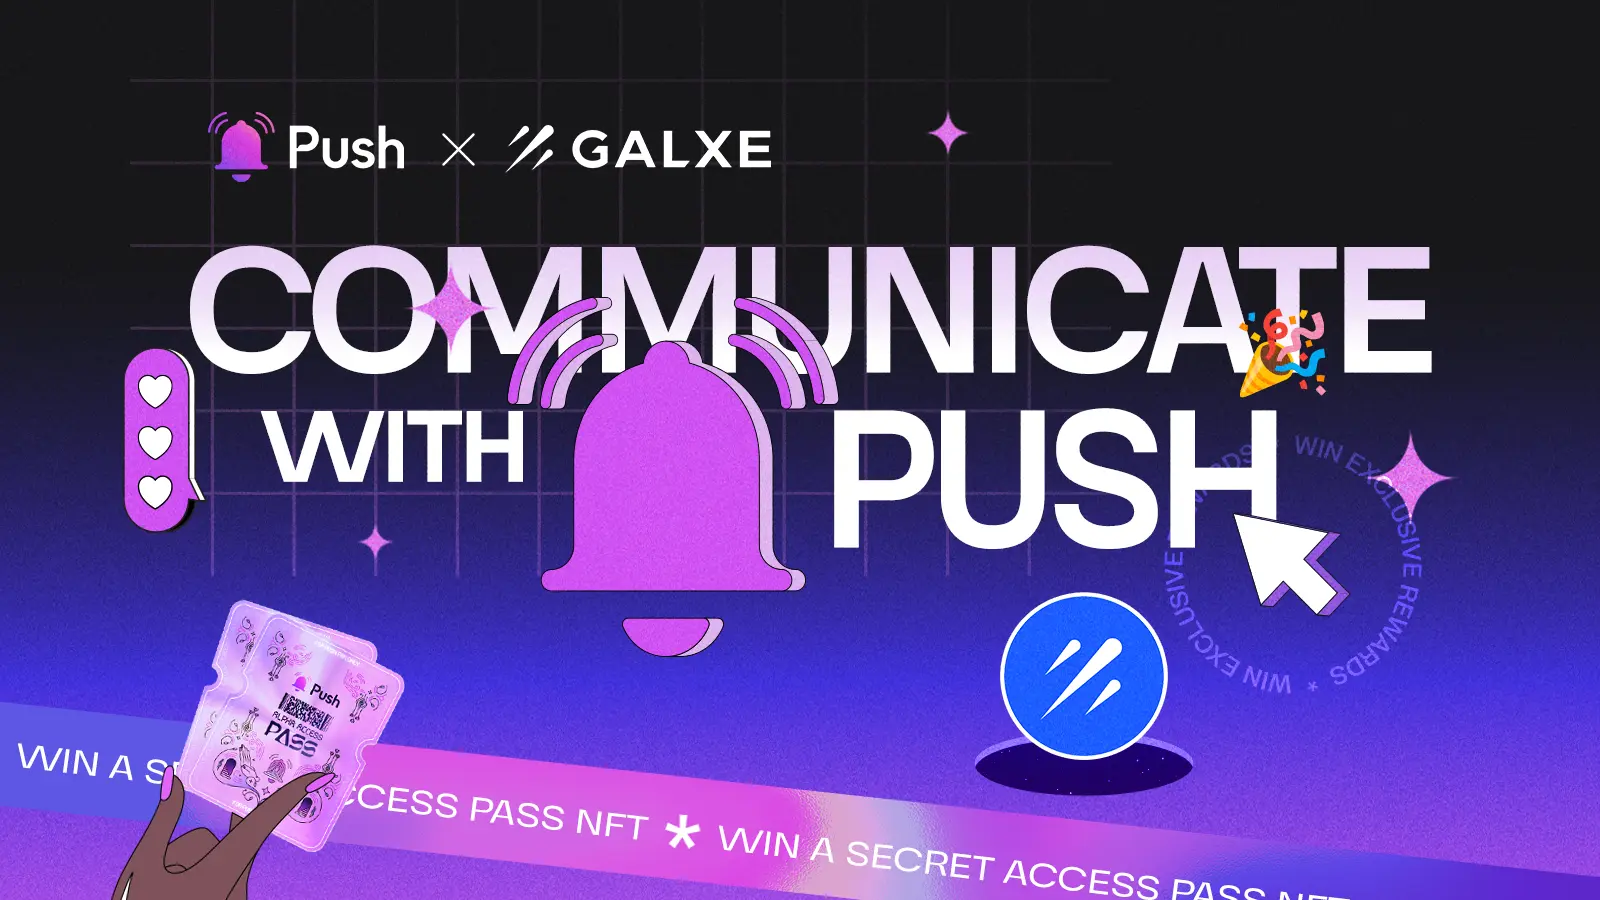 Cover Image of the Communicate With Push Contest🏆